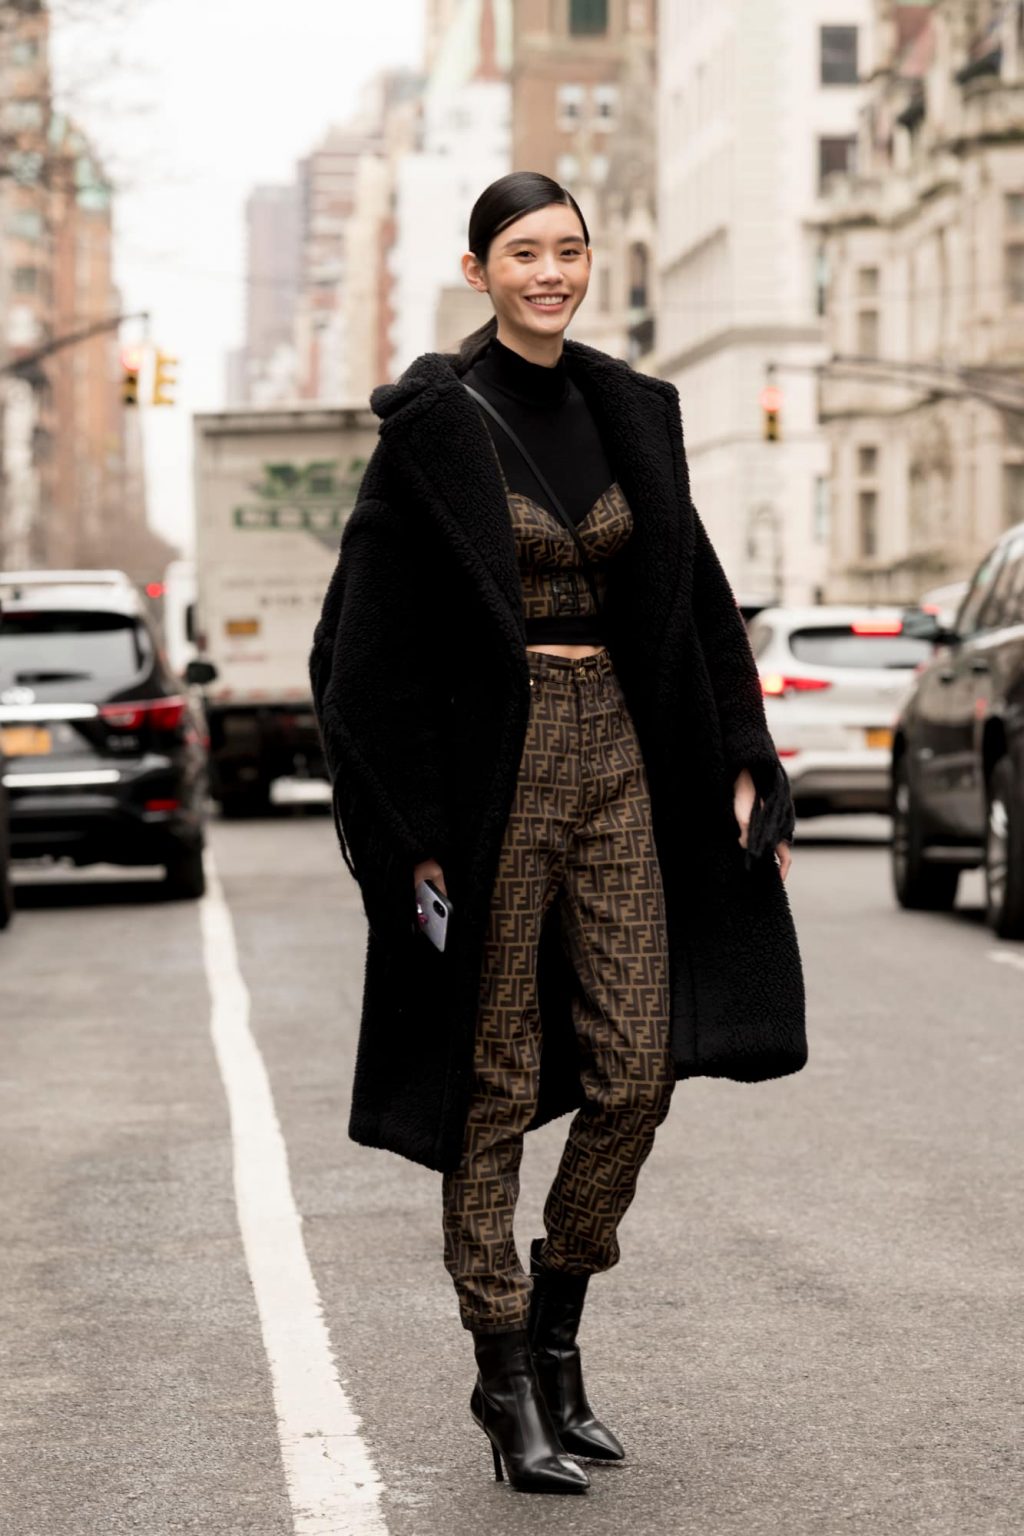 Beautiful Coat Inspiration For The Winter Season - Outfitting Ideas